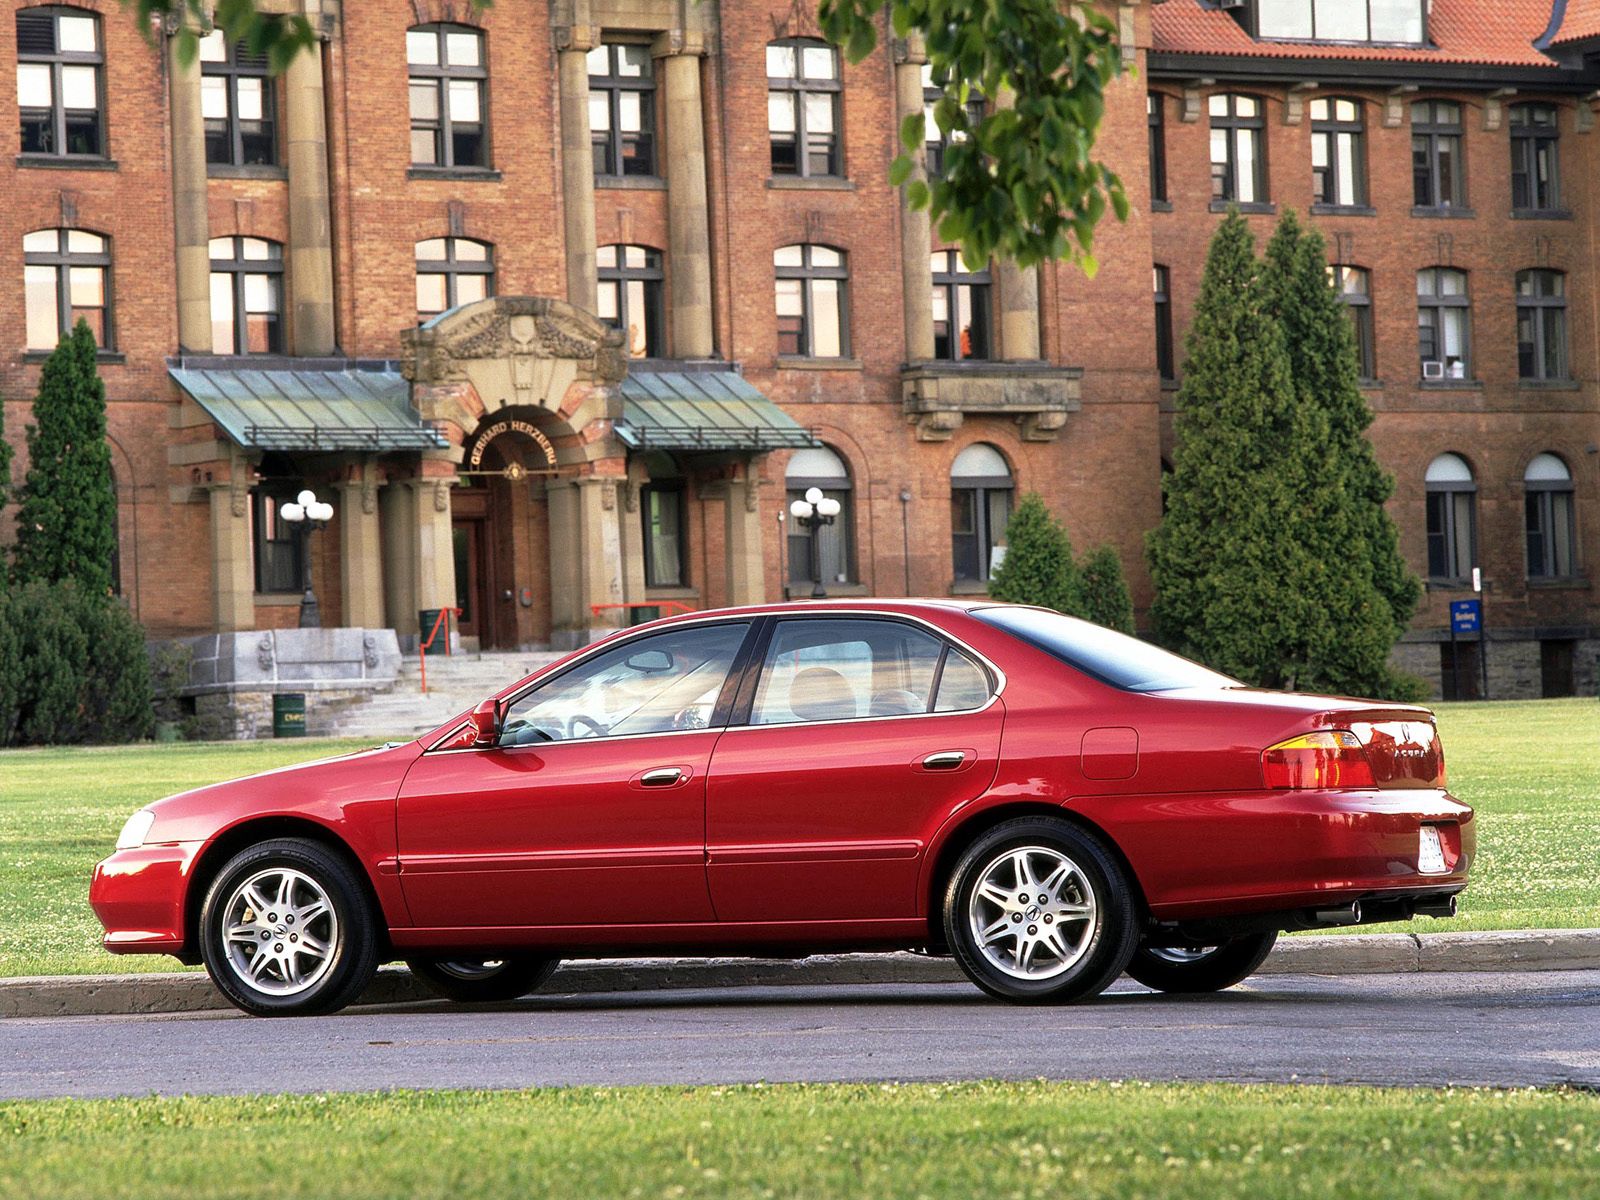 cars, auto, acura, red, building, side view, style, akura, lawn, shrubs, tl, 1999